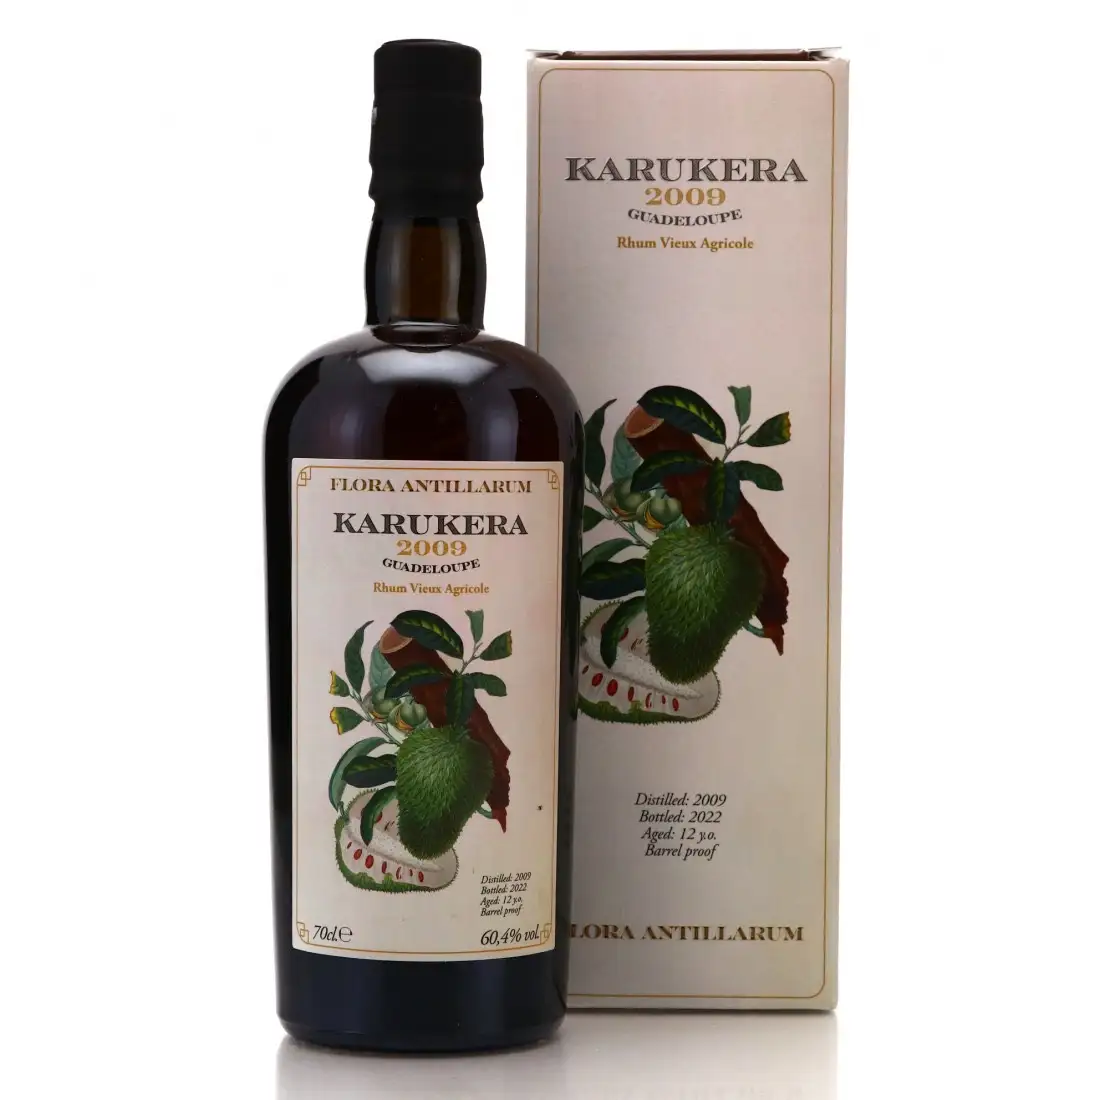 Image of the front of the bottle of the rum Flora Antillarum